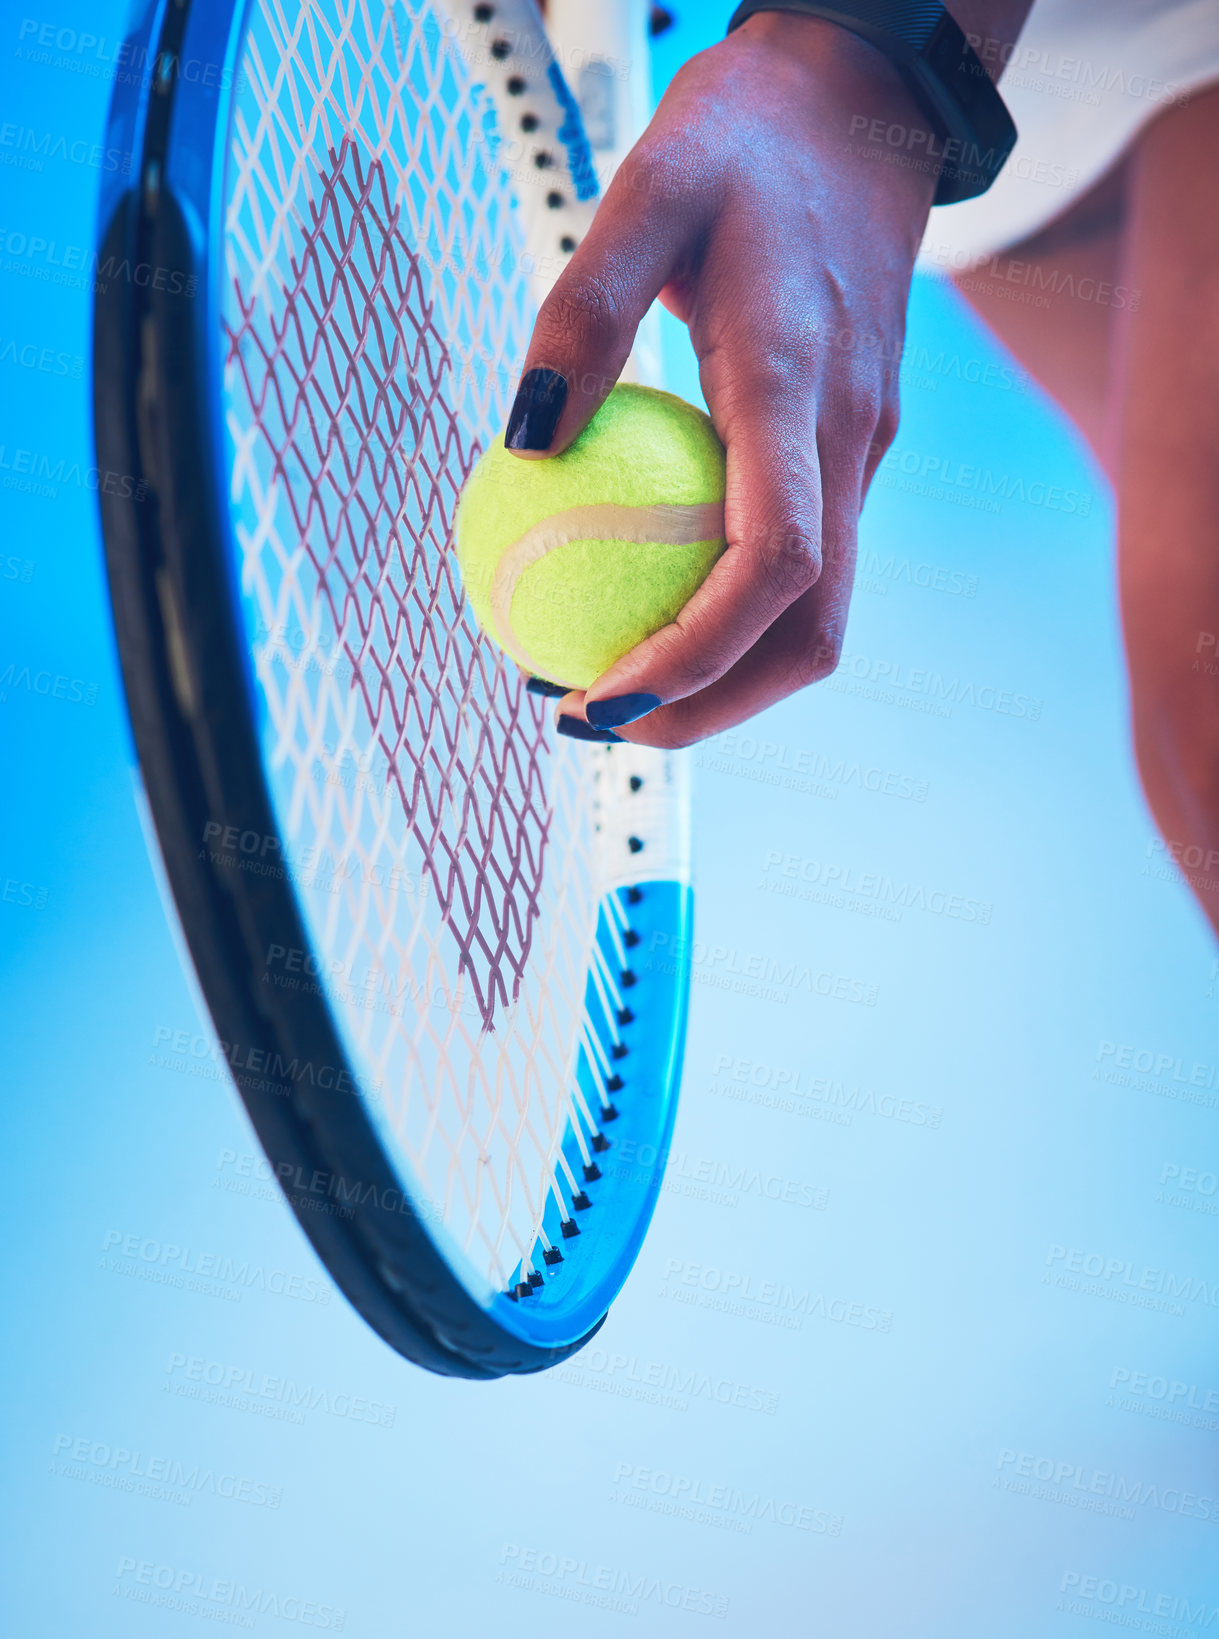 Buy stock photo Cropped shot of an unrecognizable young female tennis player getting ready to serve against a blue background